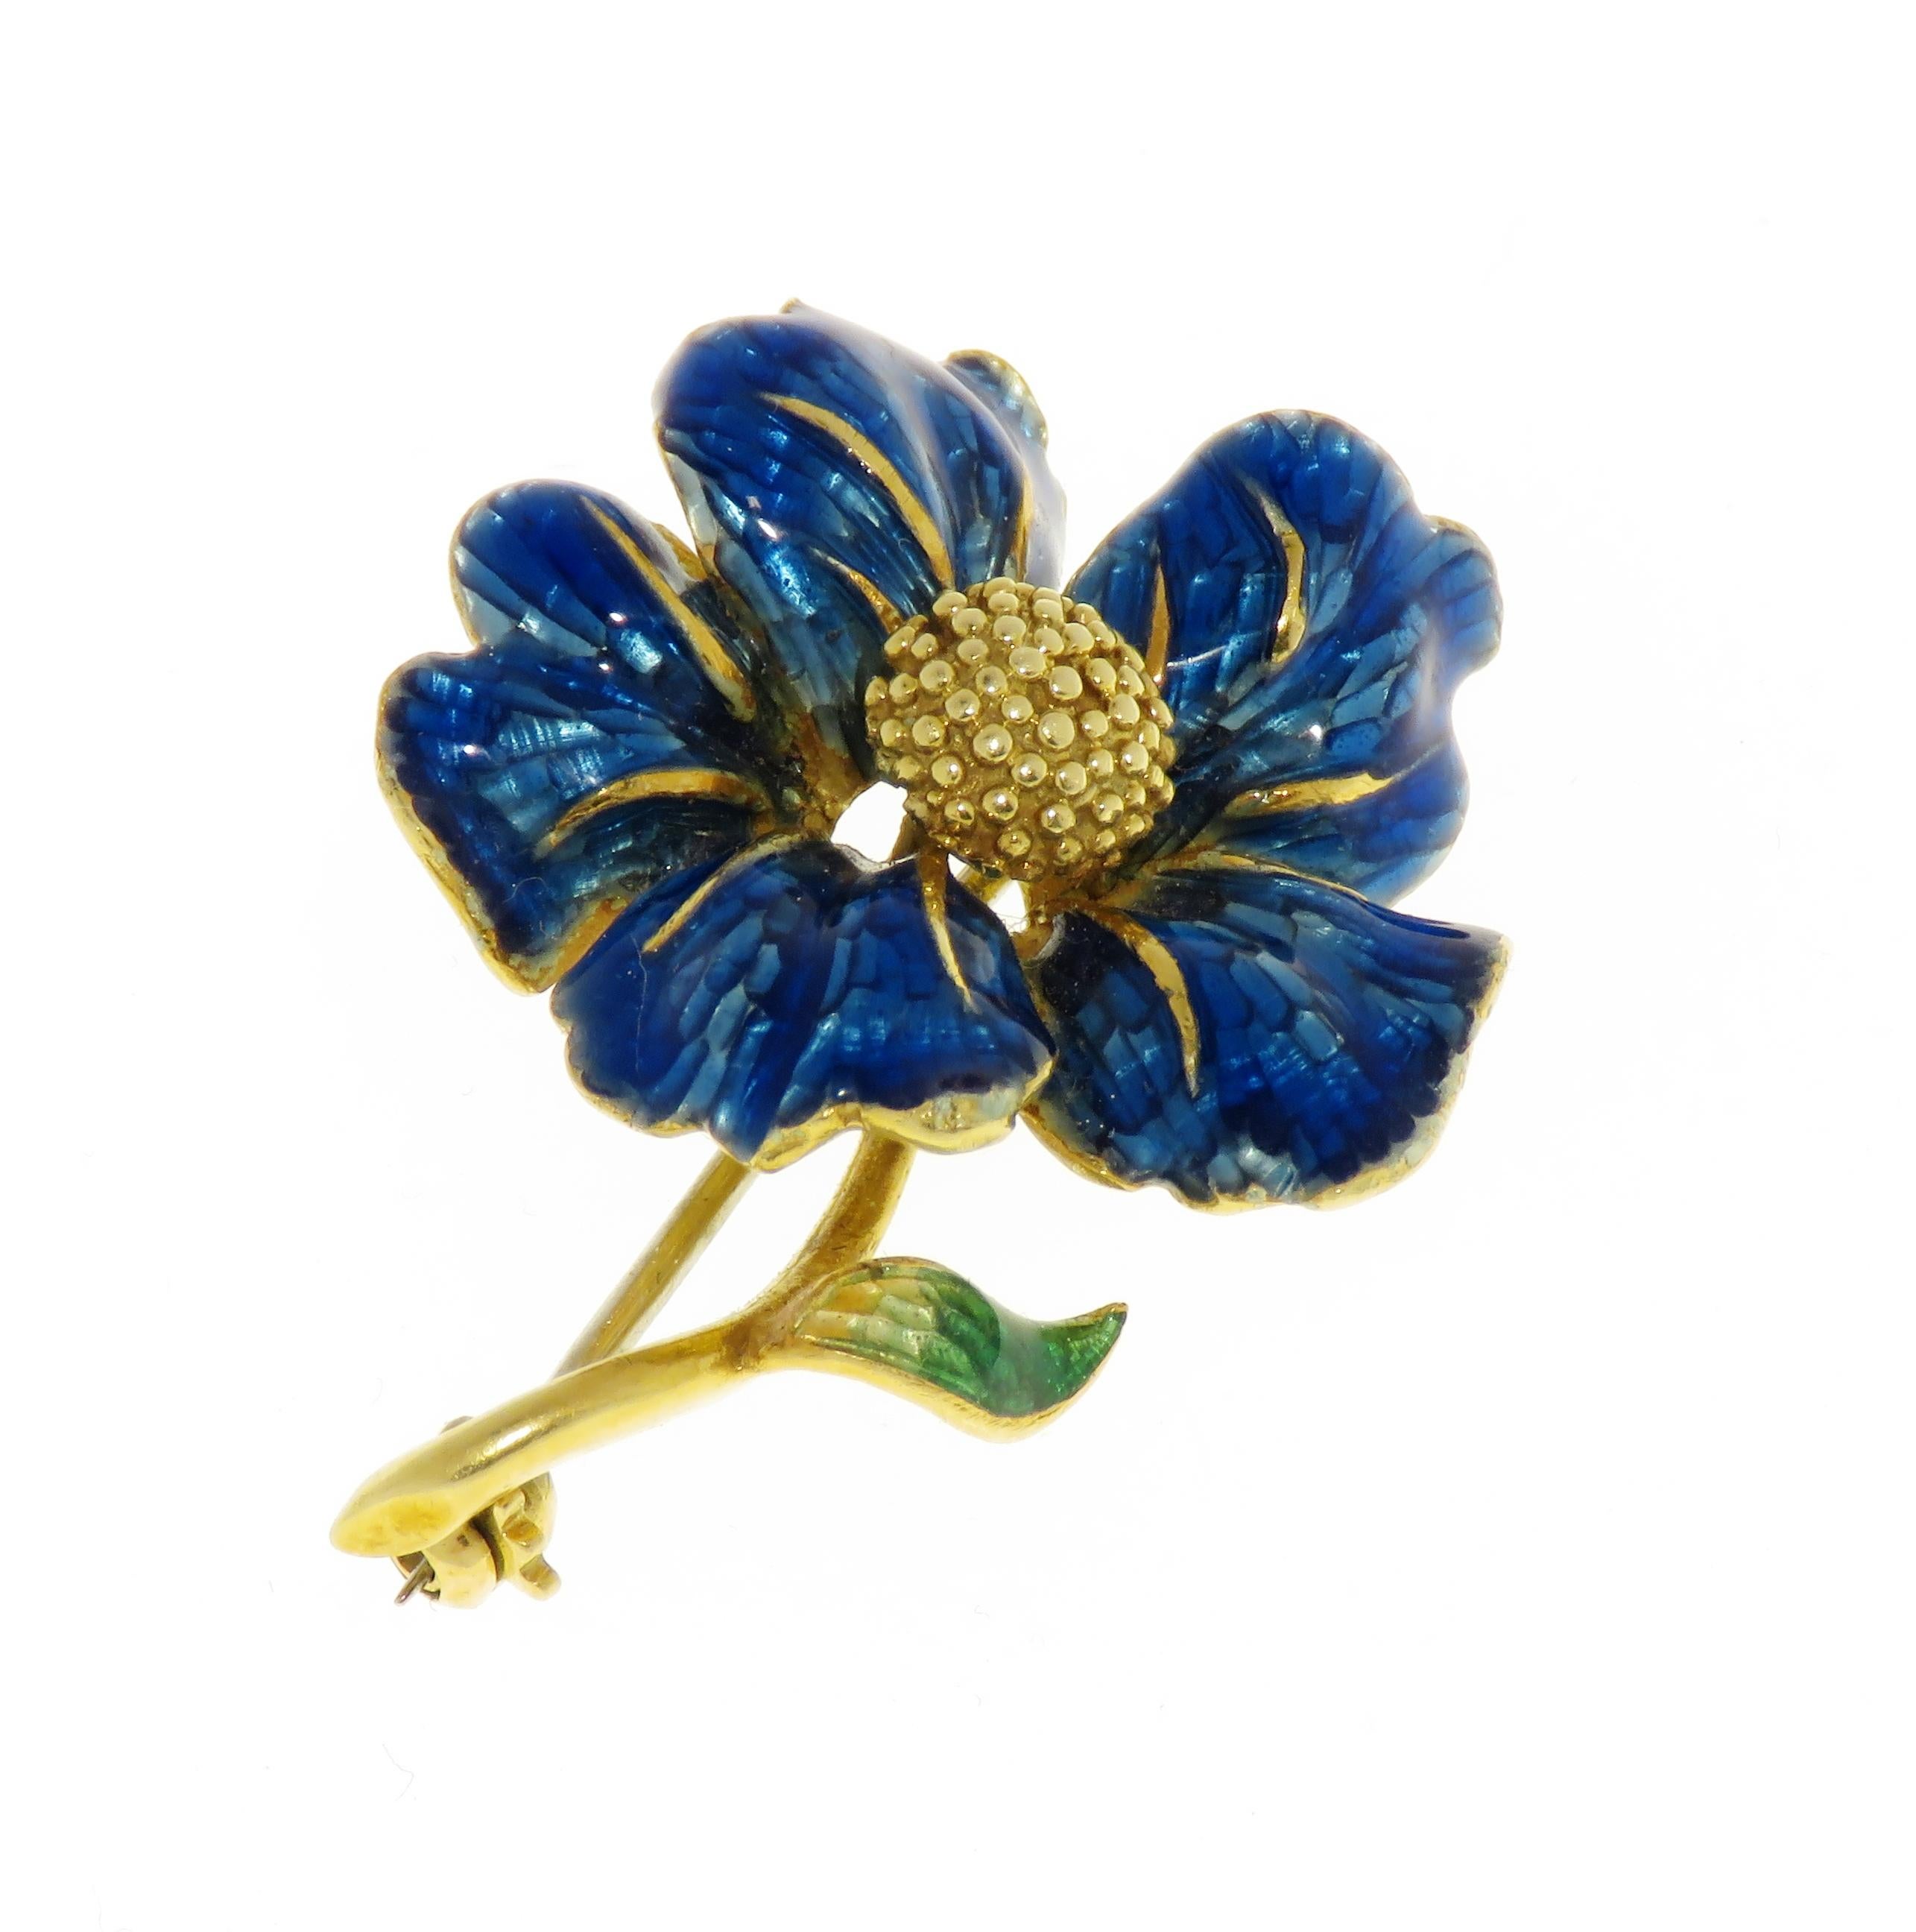 Enchanting vintage brooch featuring a blue flower with blue and green enamel handmade in 18 karat yellow gold. The size of the brooch is 26X38mm / 1.023x1.496 inches. Marked with the Italian gold mark 750.

Handcrafted in: 18 karat yellow gold.
Size